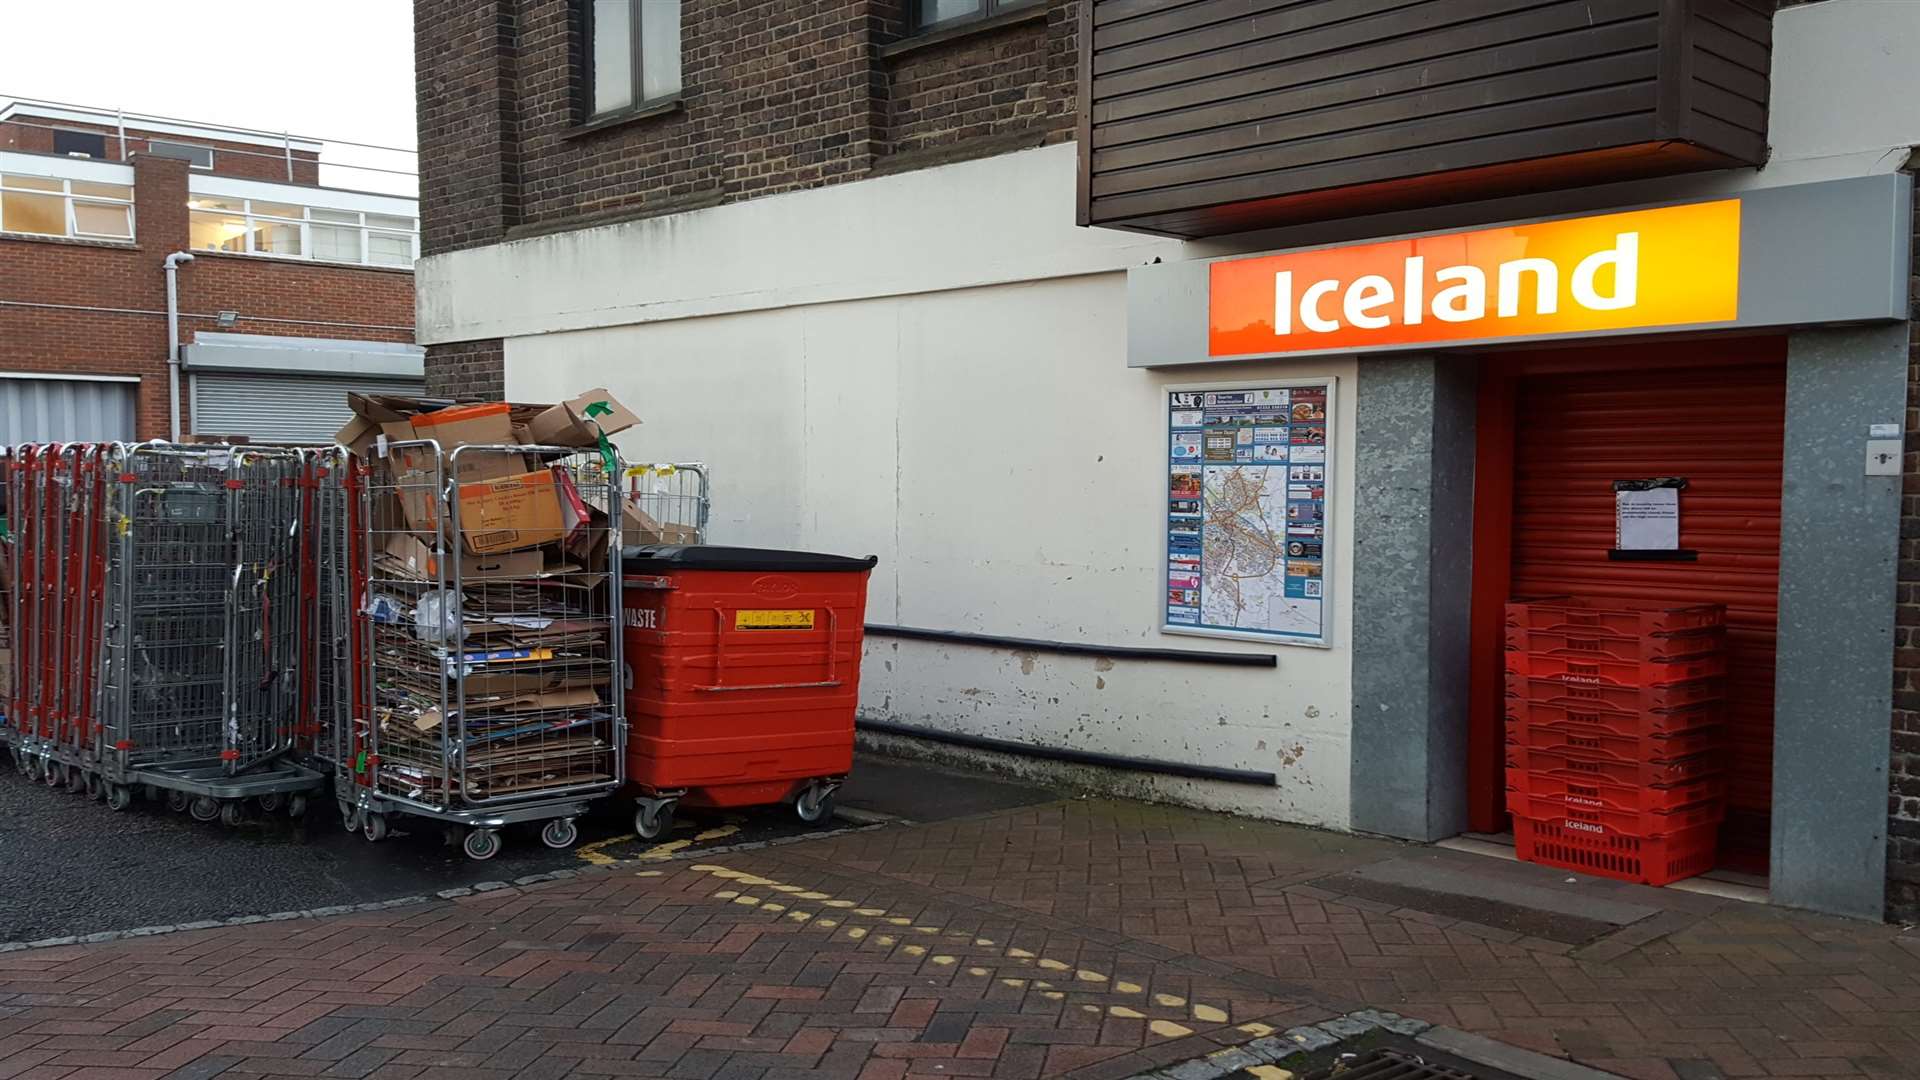 The rear entrance to the Iceland store has been closed